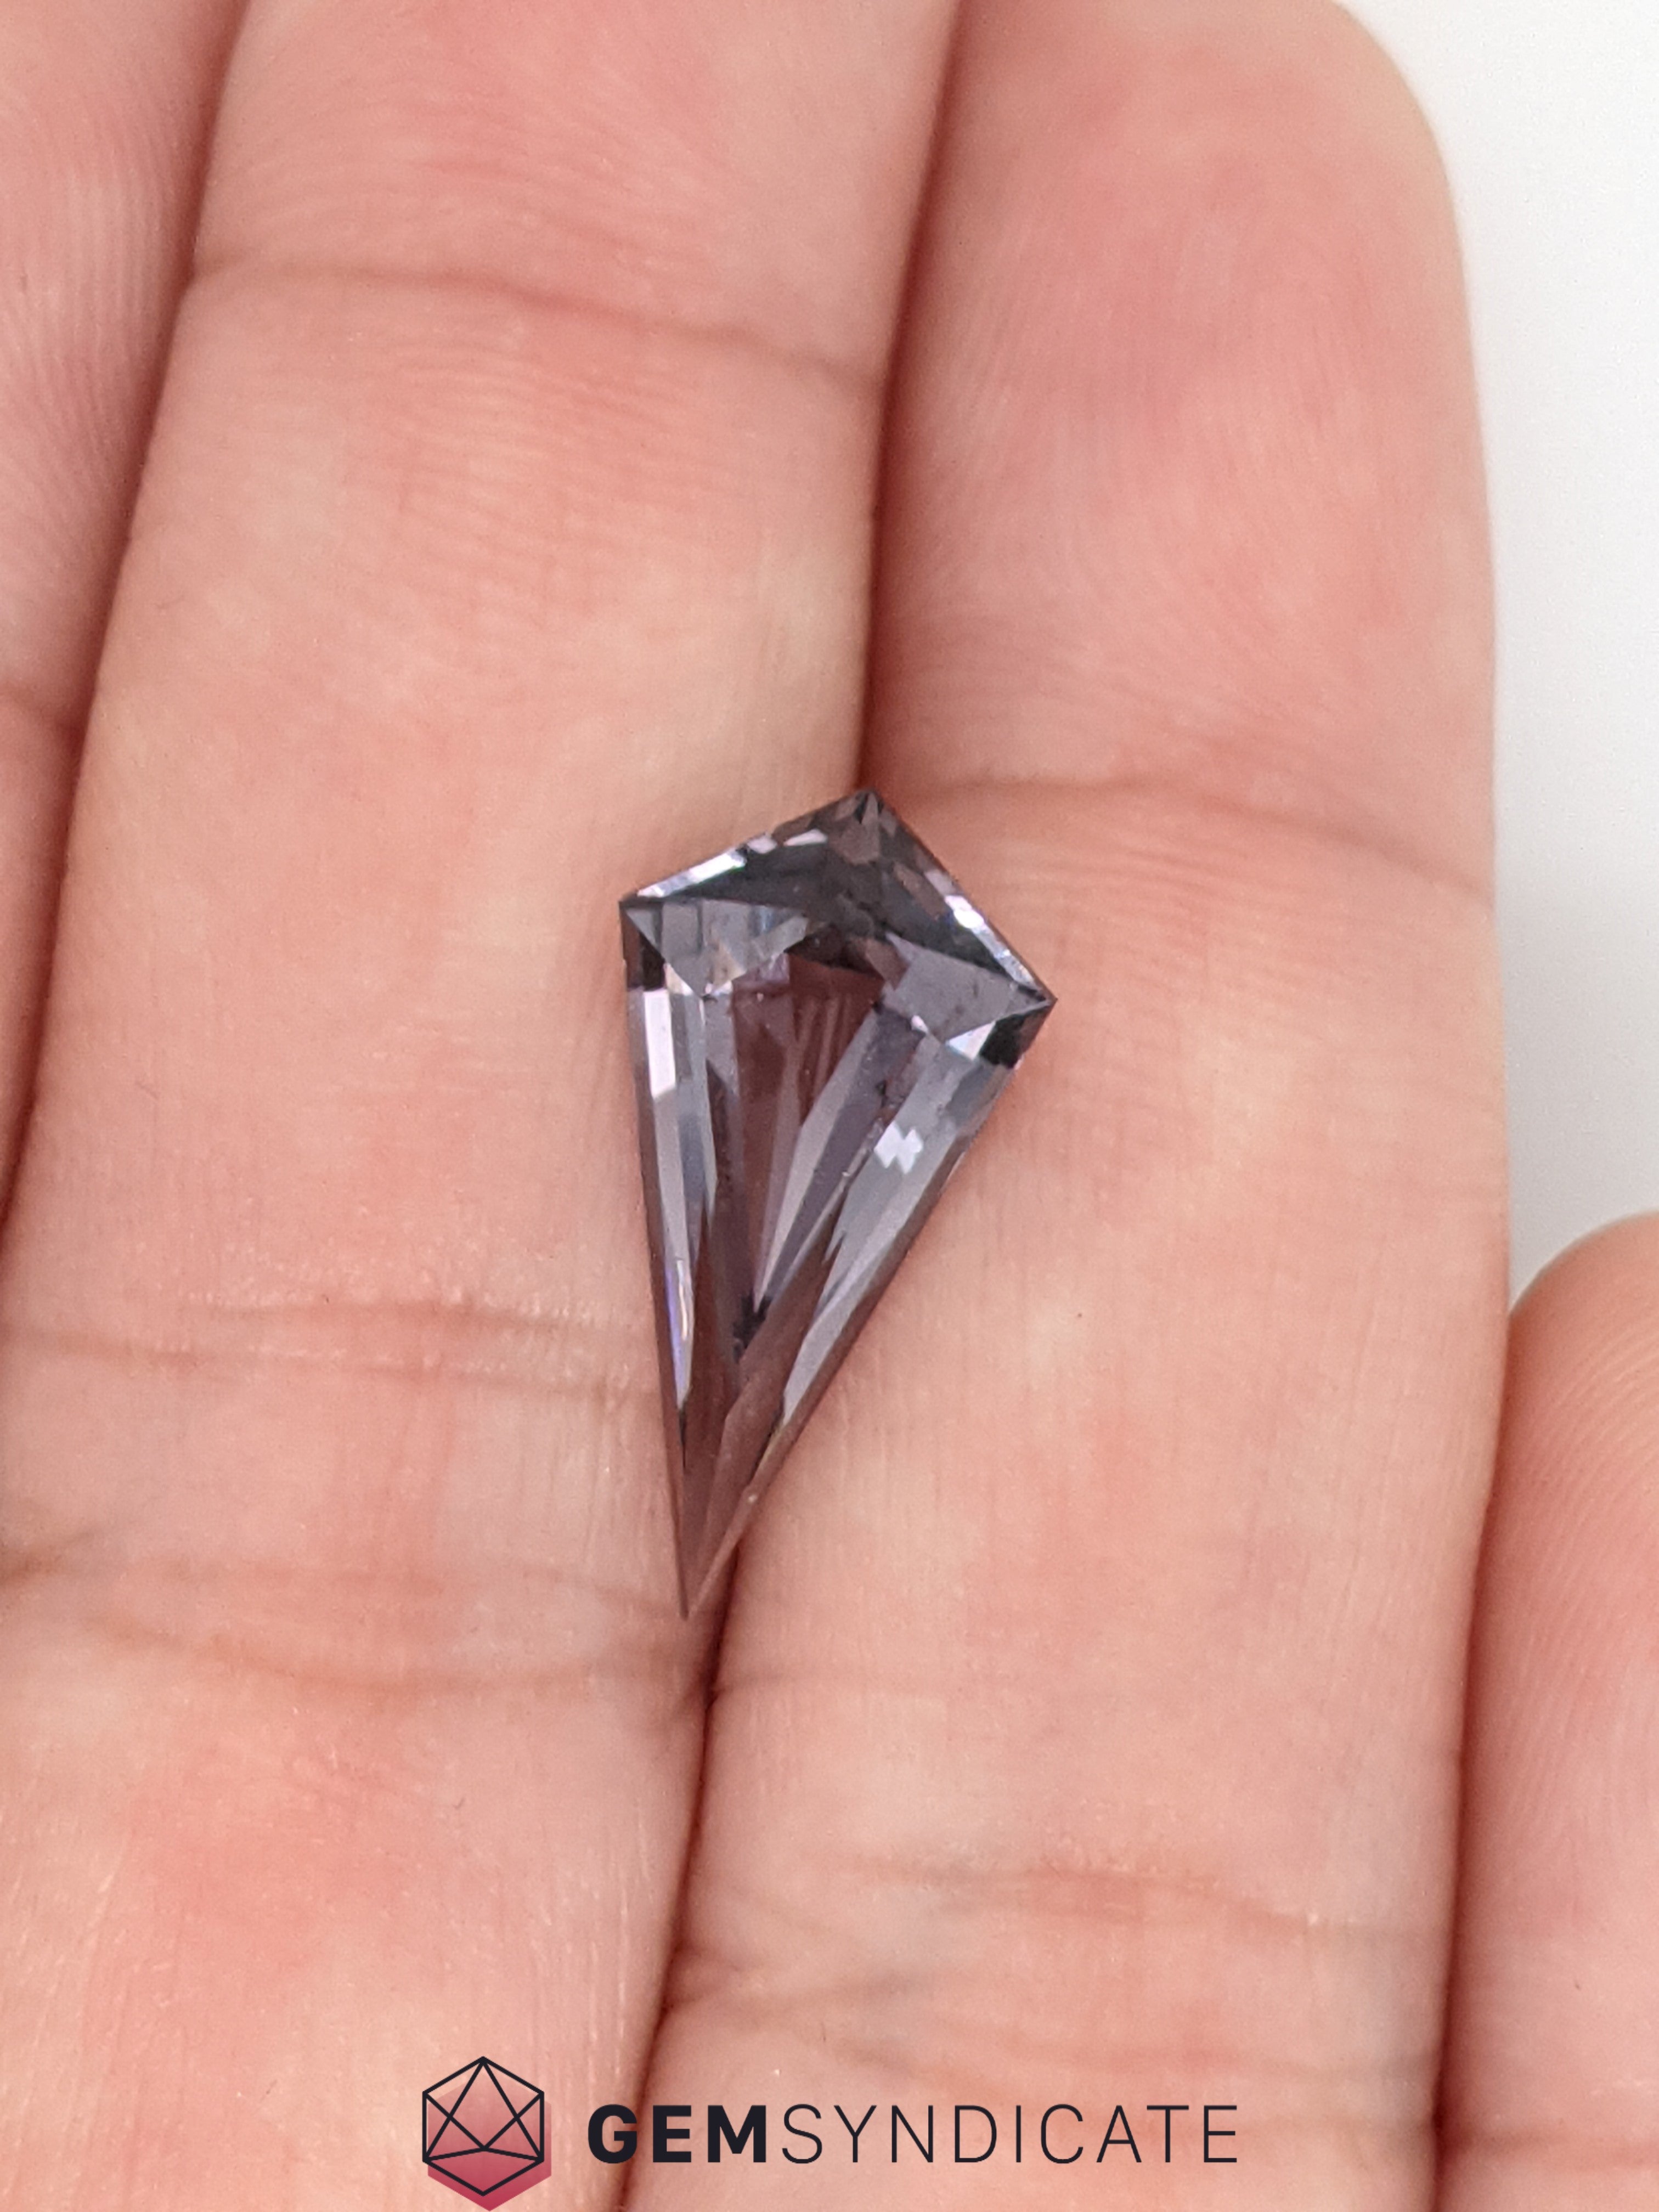 Outstanding Kite Shape Grey Spinel 4.08ct